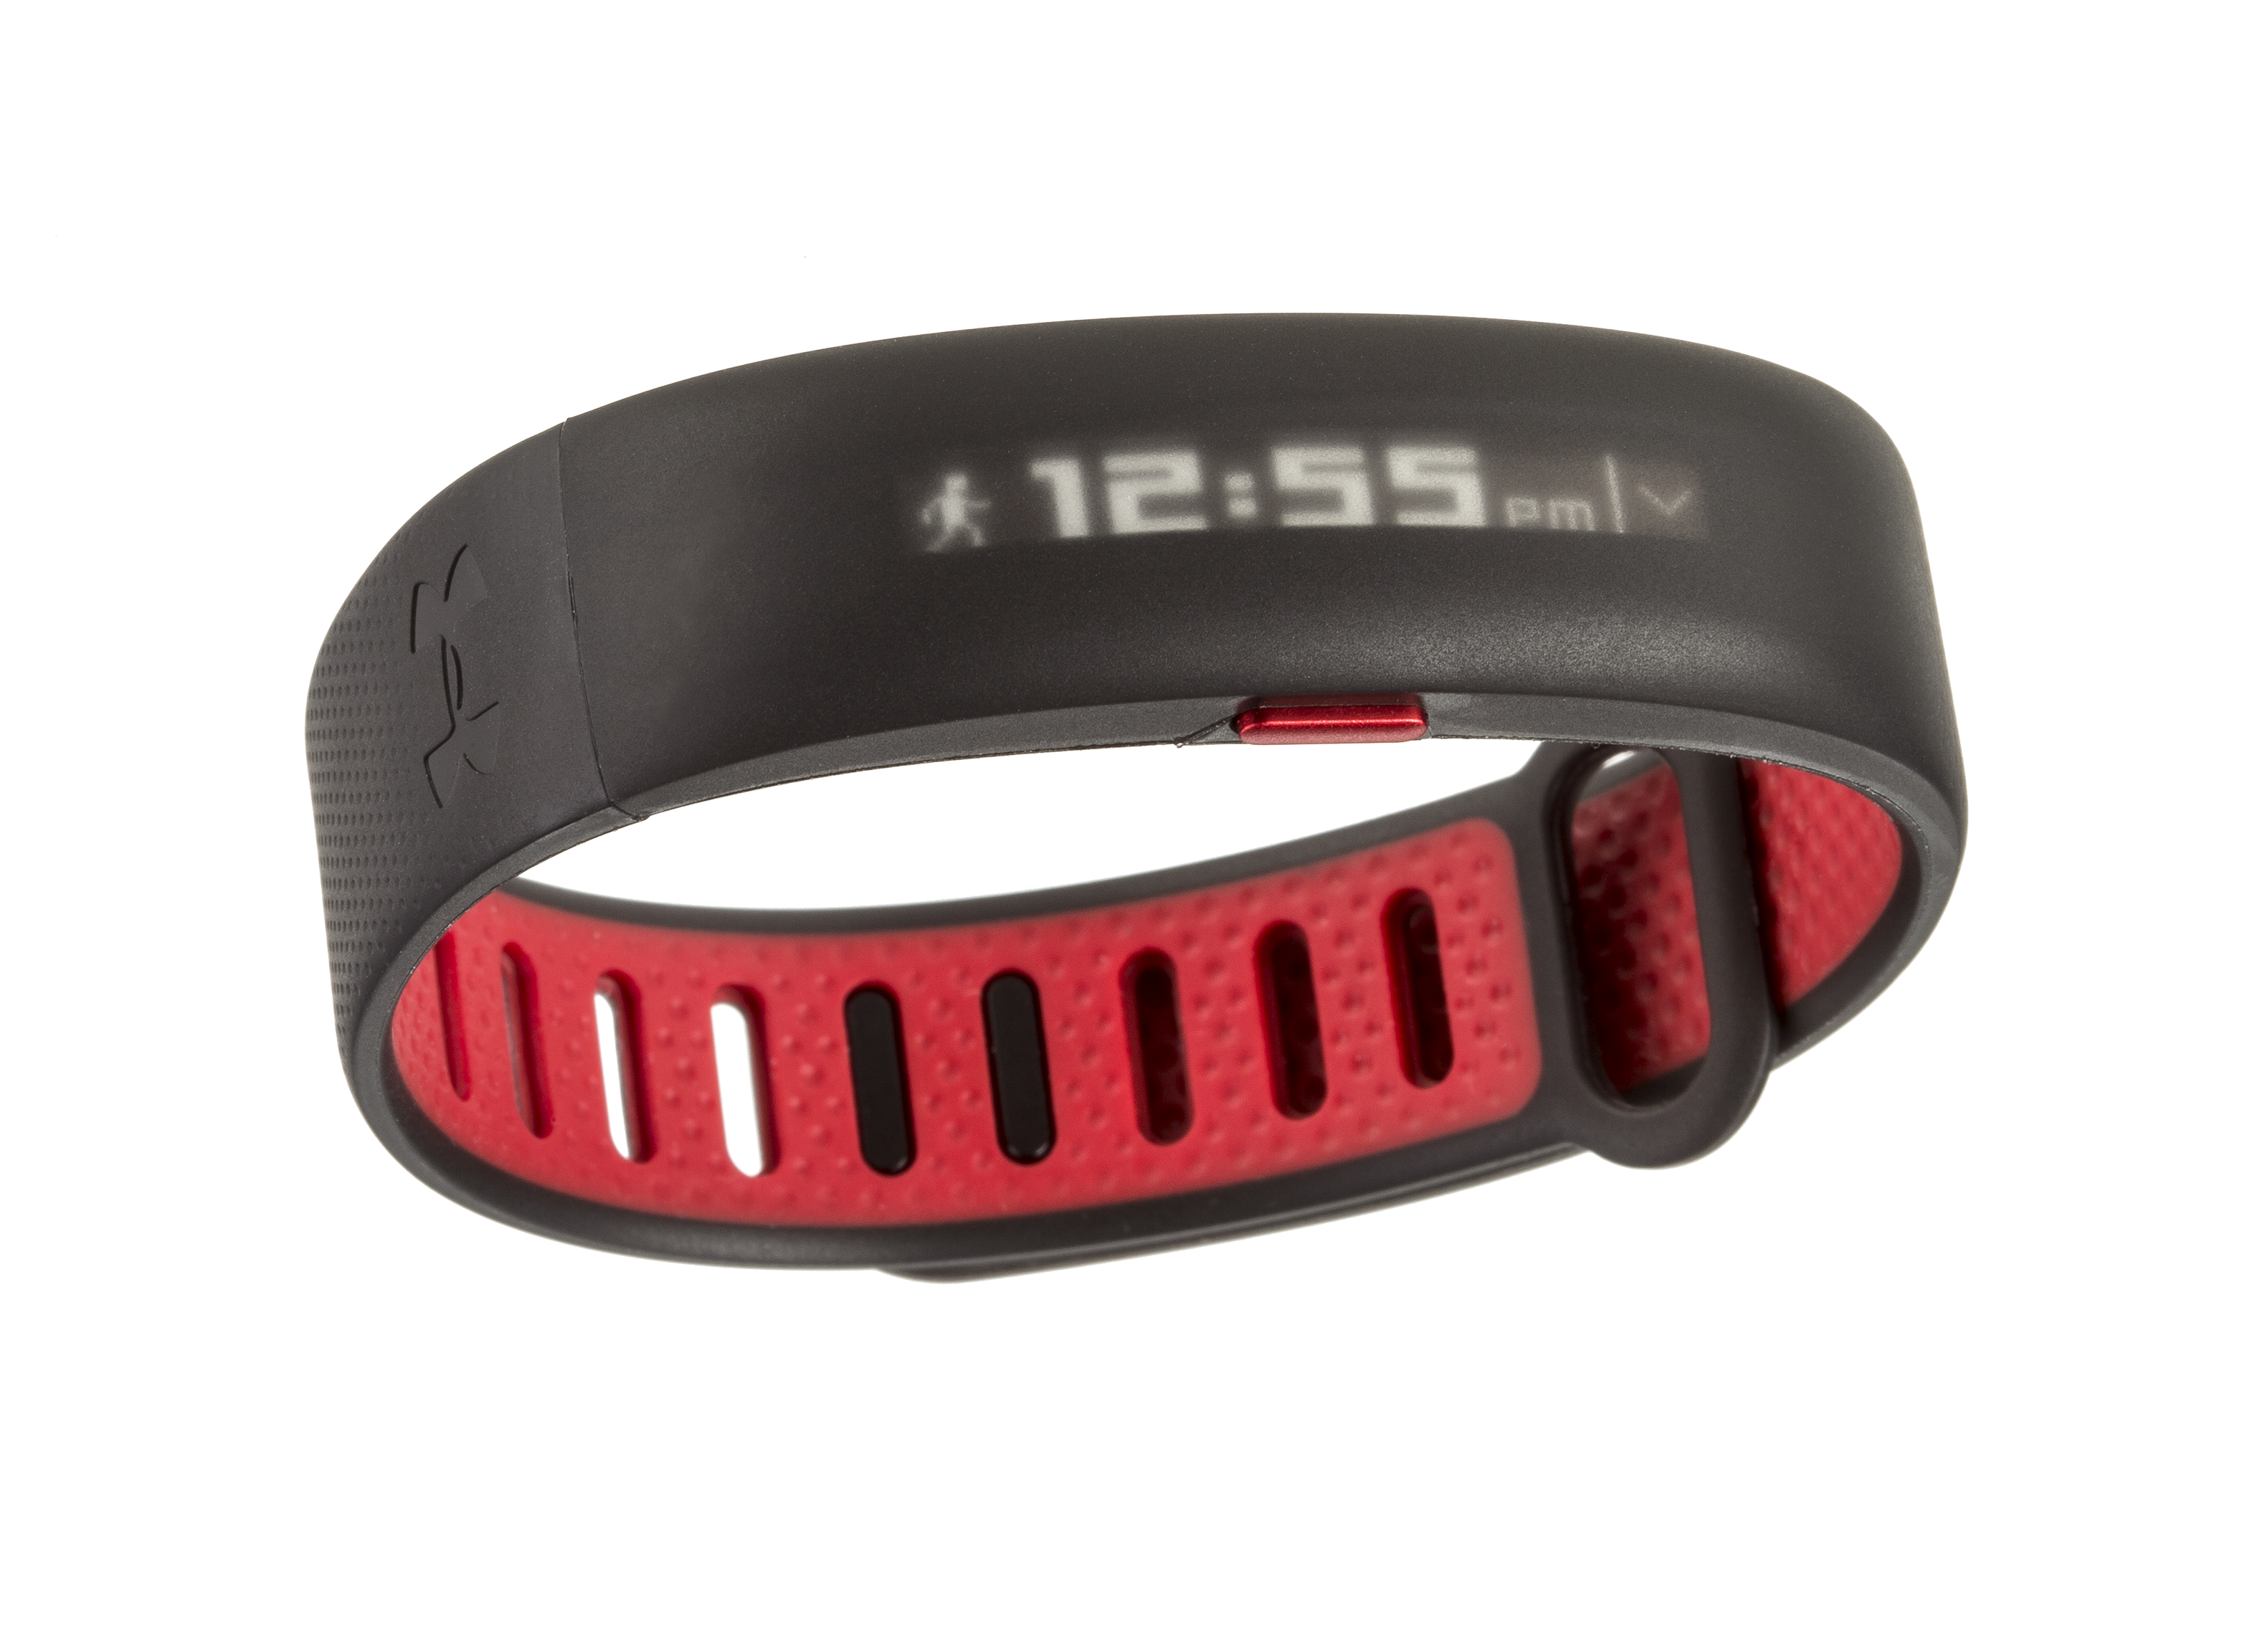 Under Armour Band Fitness - Consumer Reports